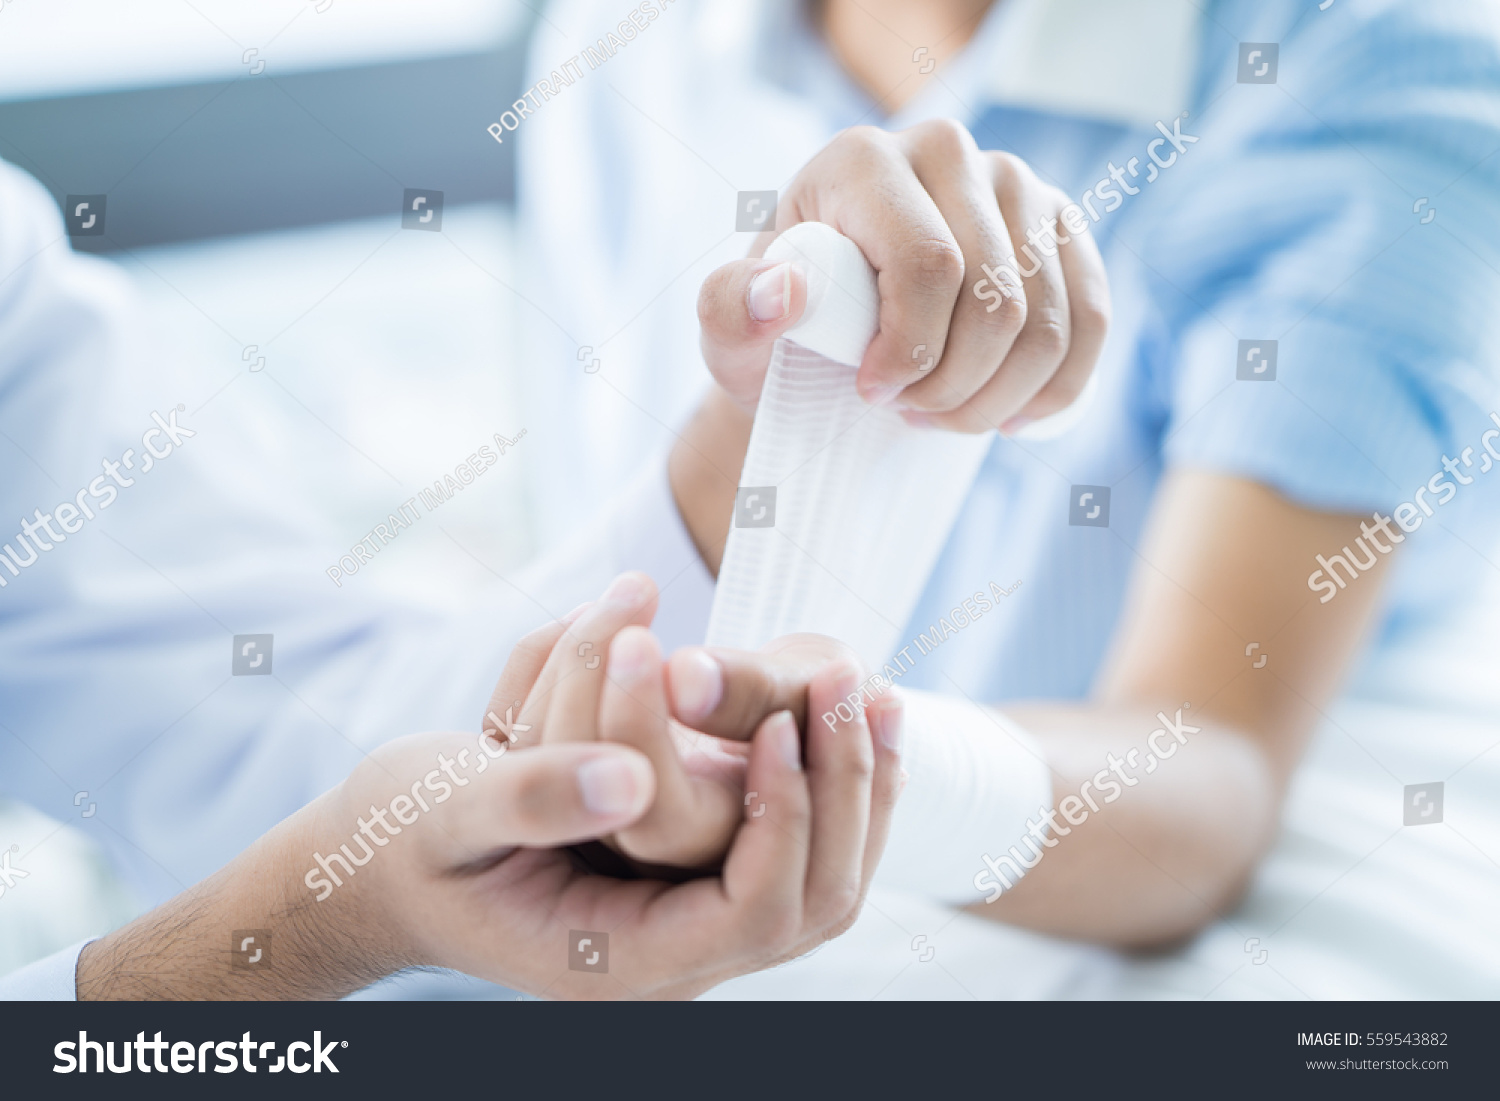 Close-up doctor is bandaging upper limb of patient. #559543882